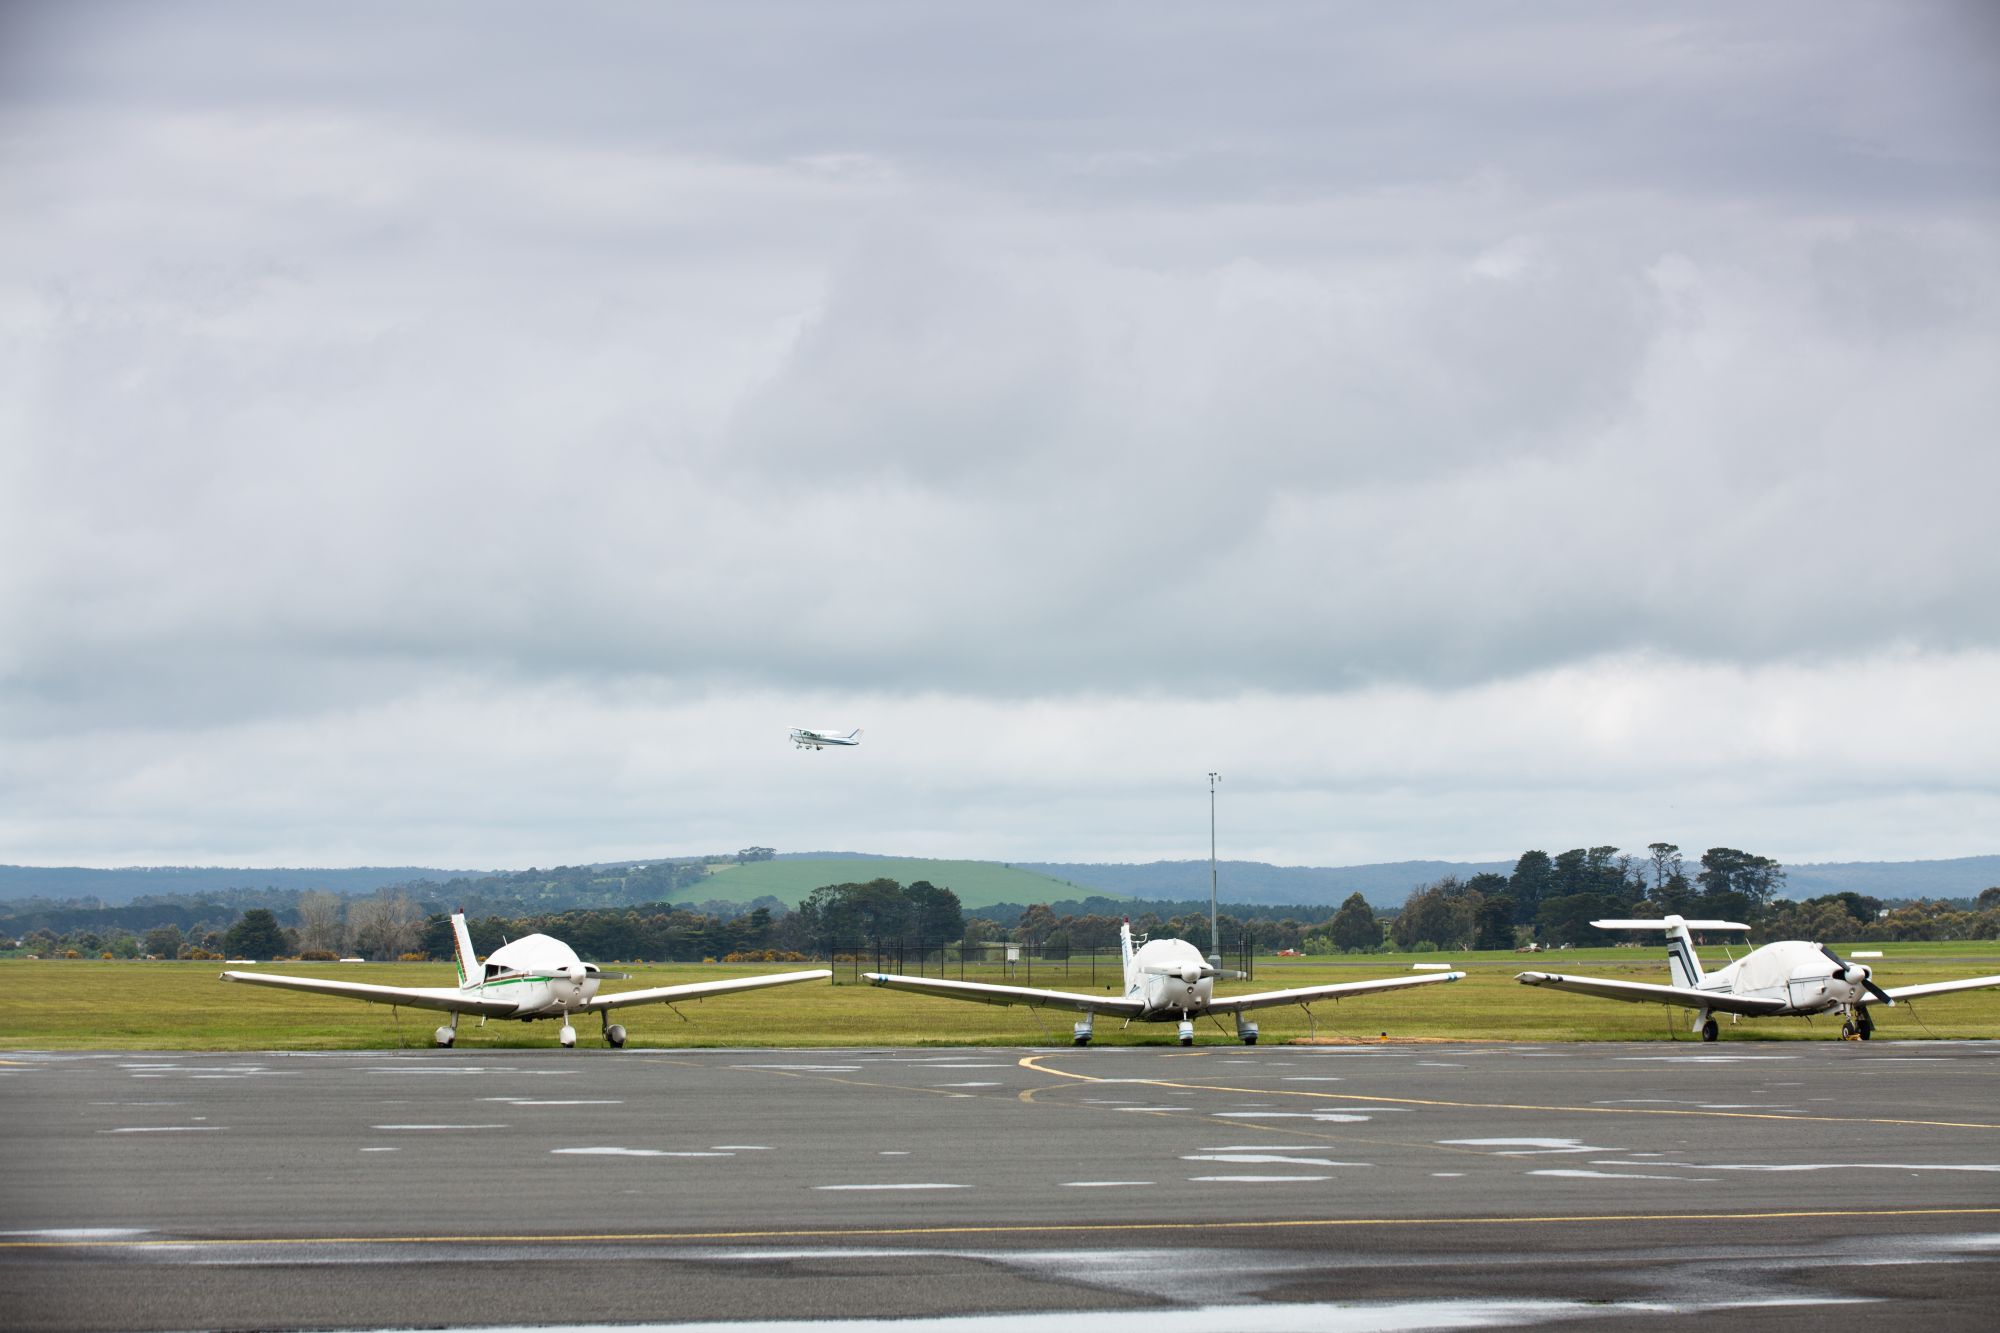 Generic image airport runway and planes